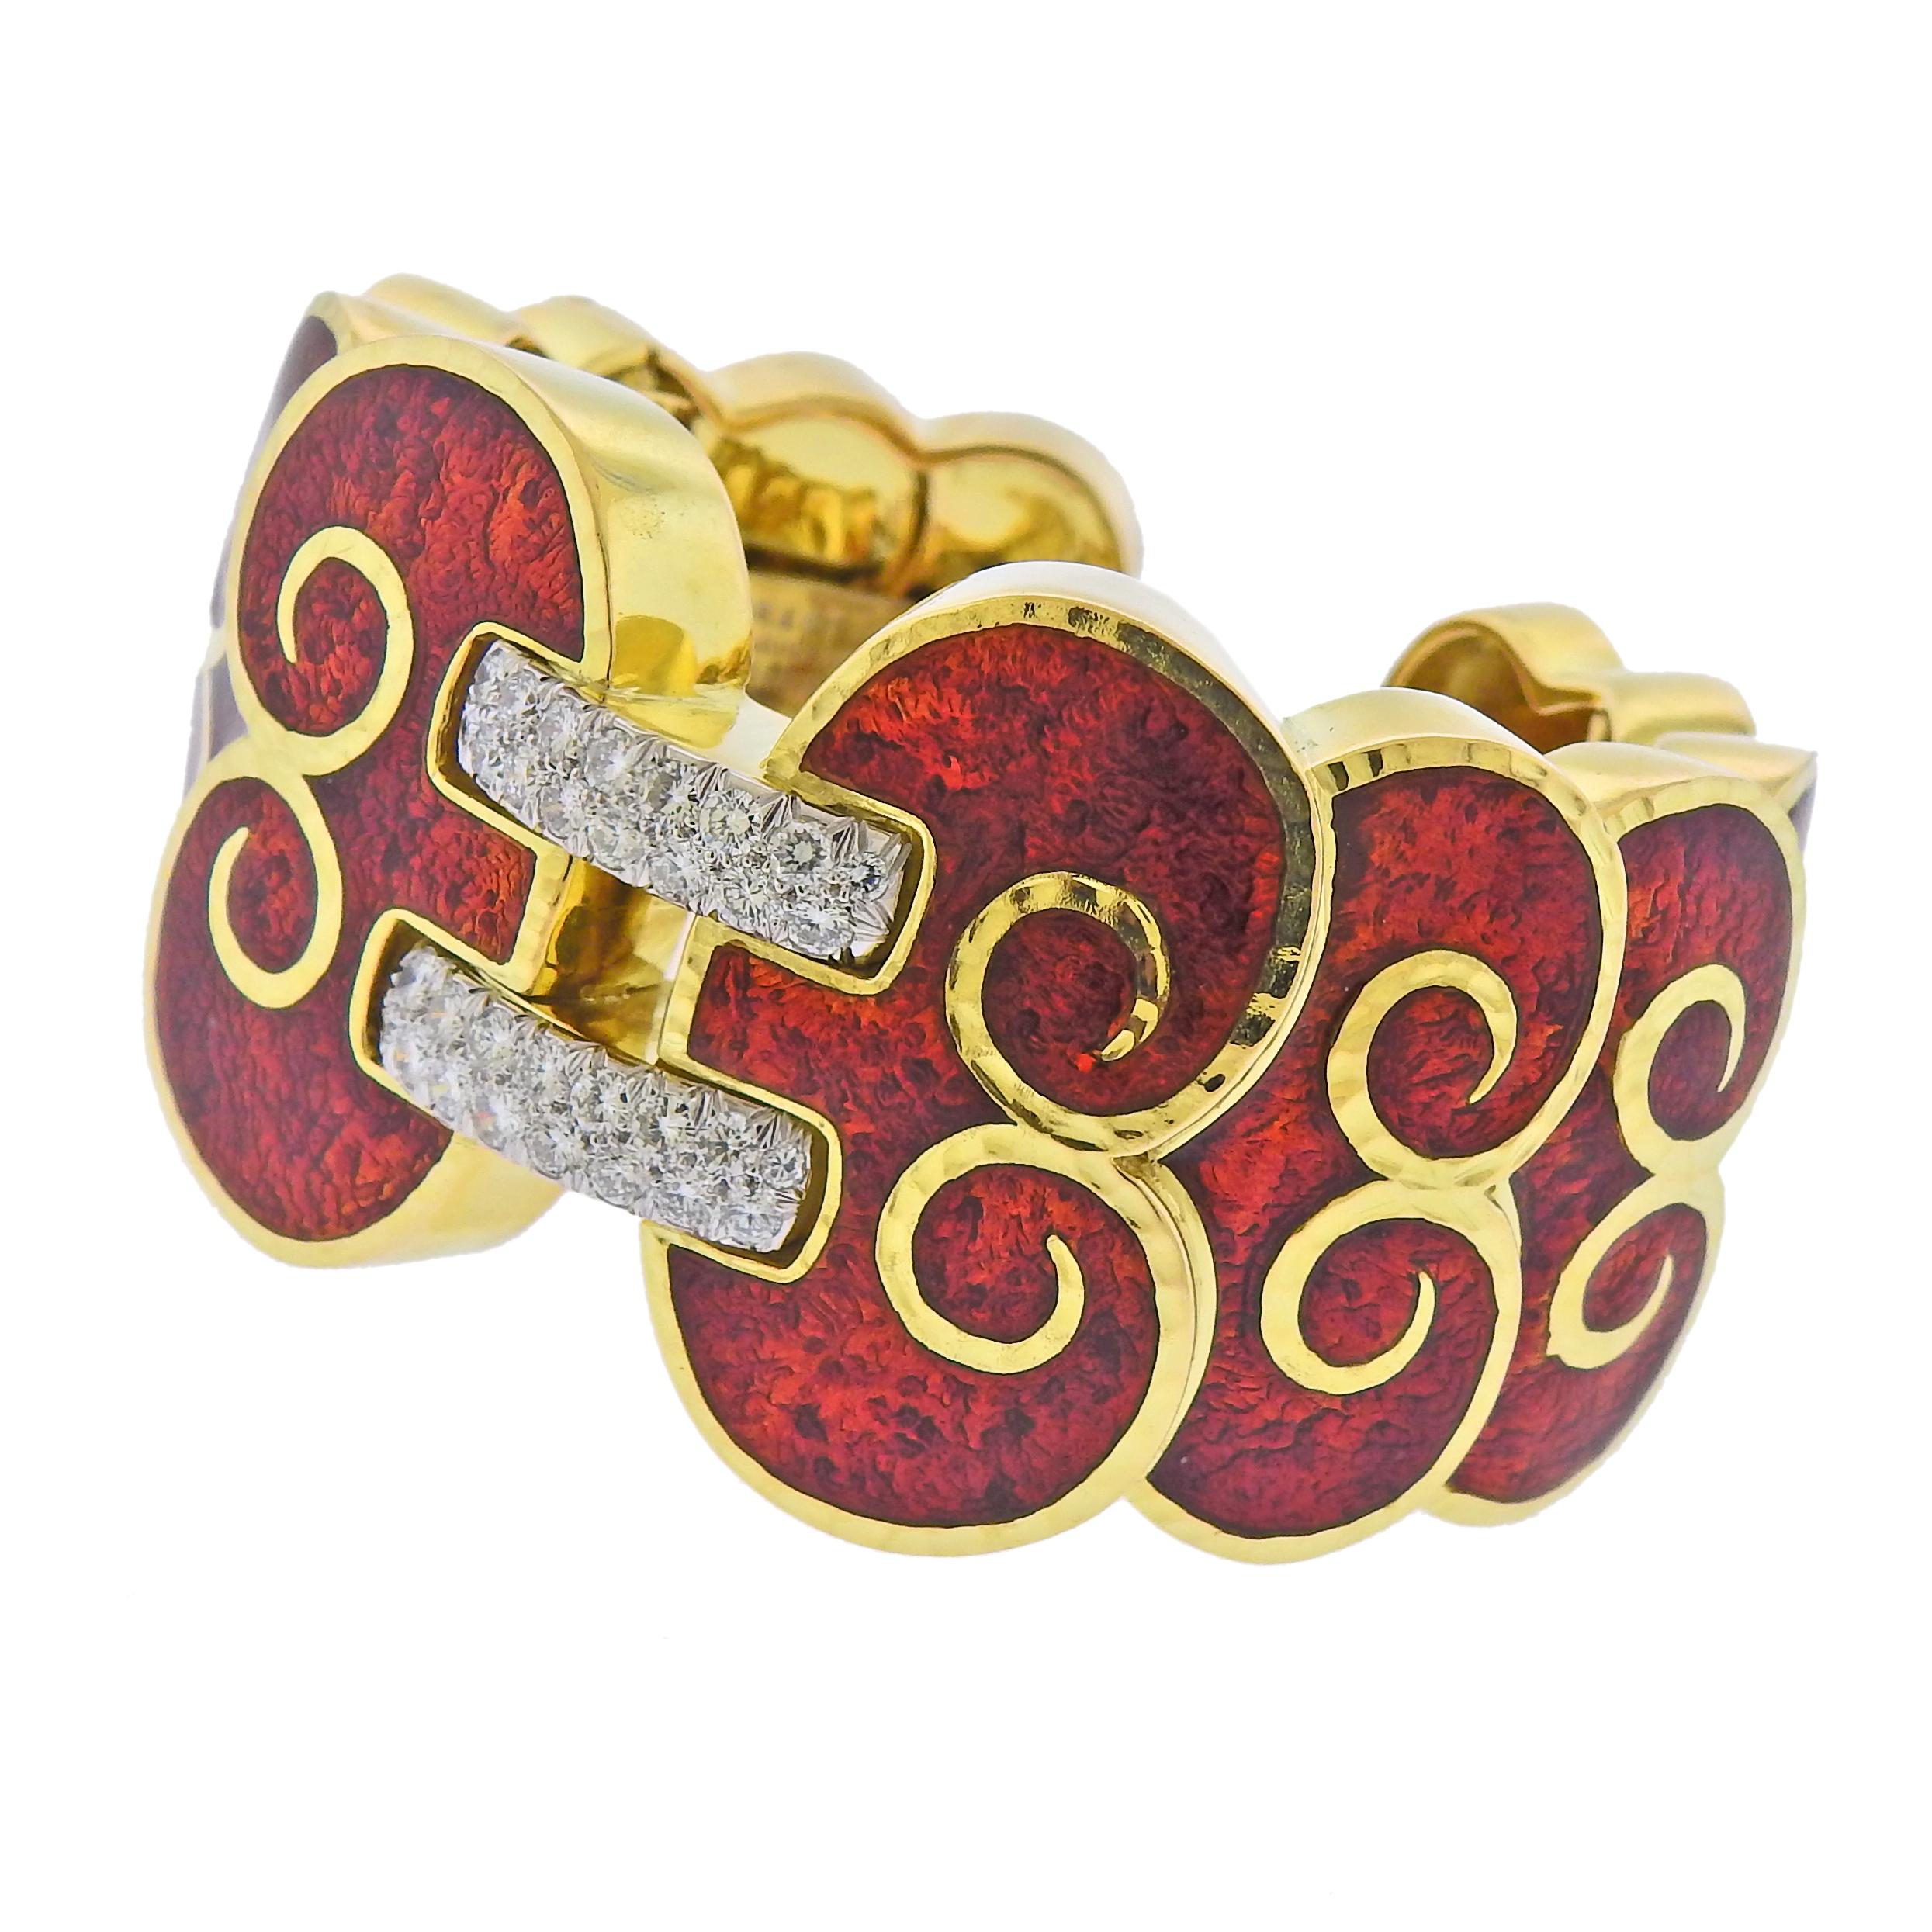 18k yellow gold and platinum red enamel cuff bracelet by David Webb, with approx. 1.60cts in H/VS-SI1 diamonds. Cuff will fit approx. 6.75